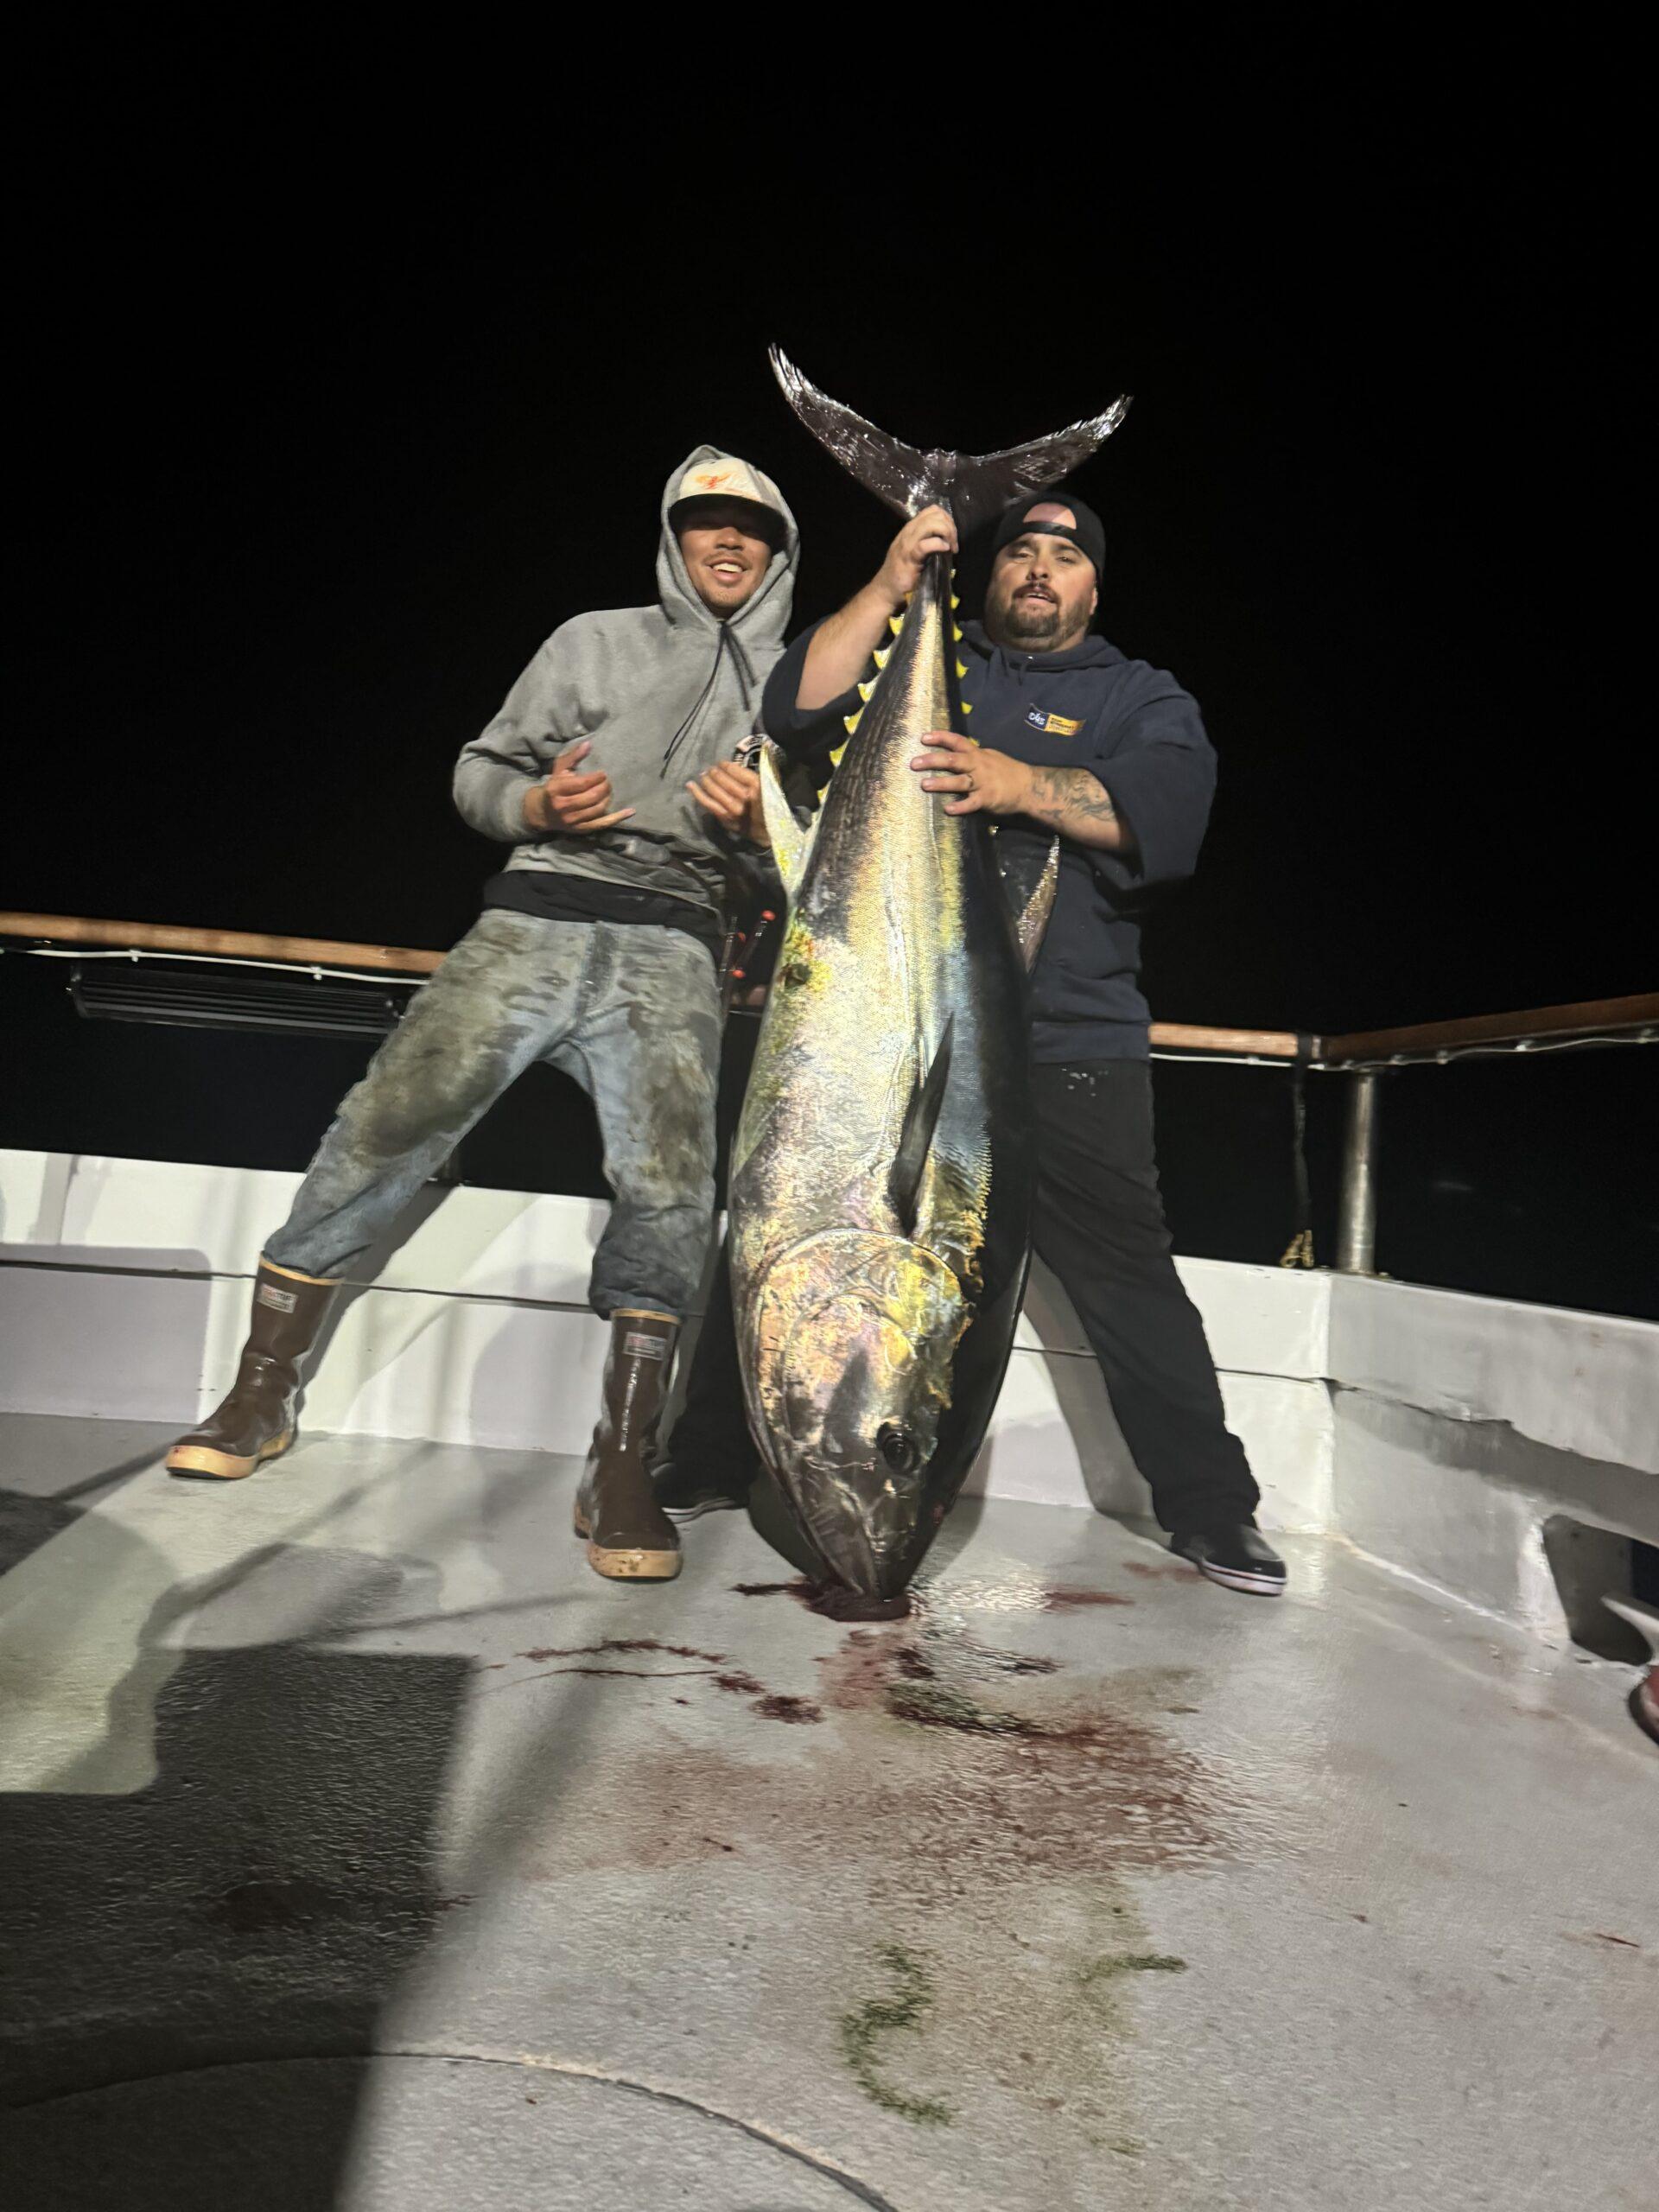 Angler and crew member caught a 200 pond bluefin tuna!